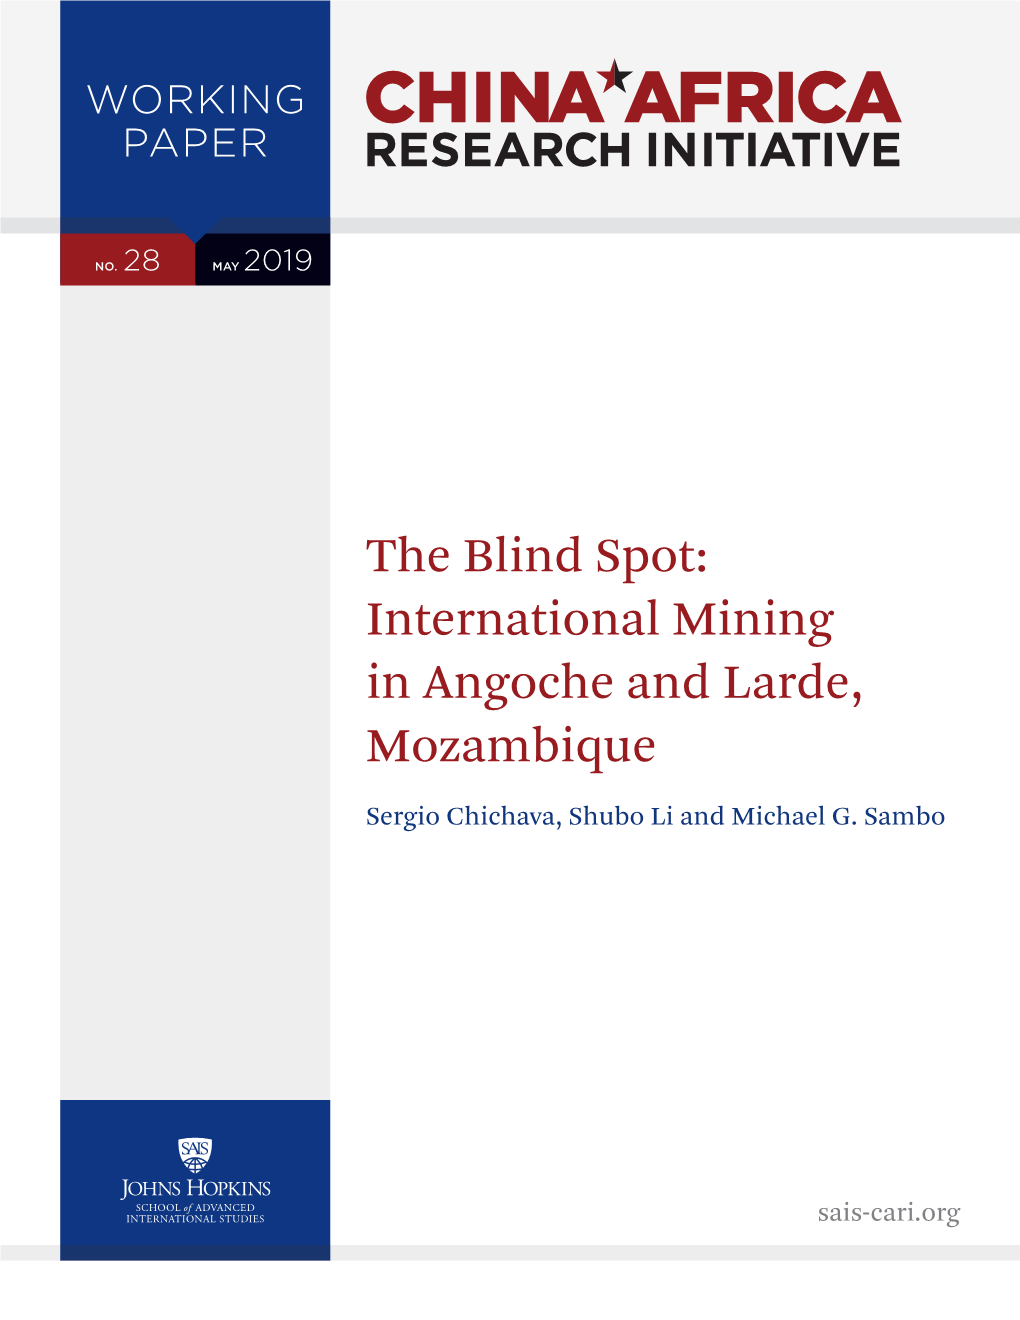 International Mining in Angoche and Larde, Mozambique